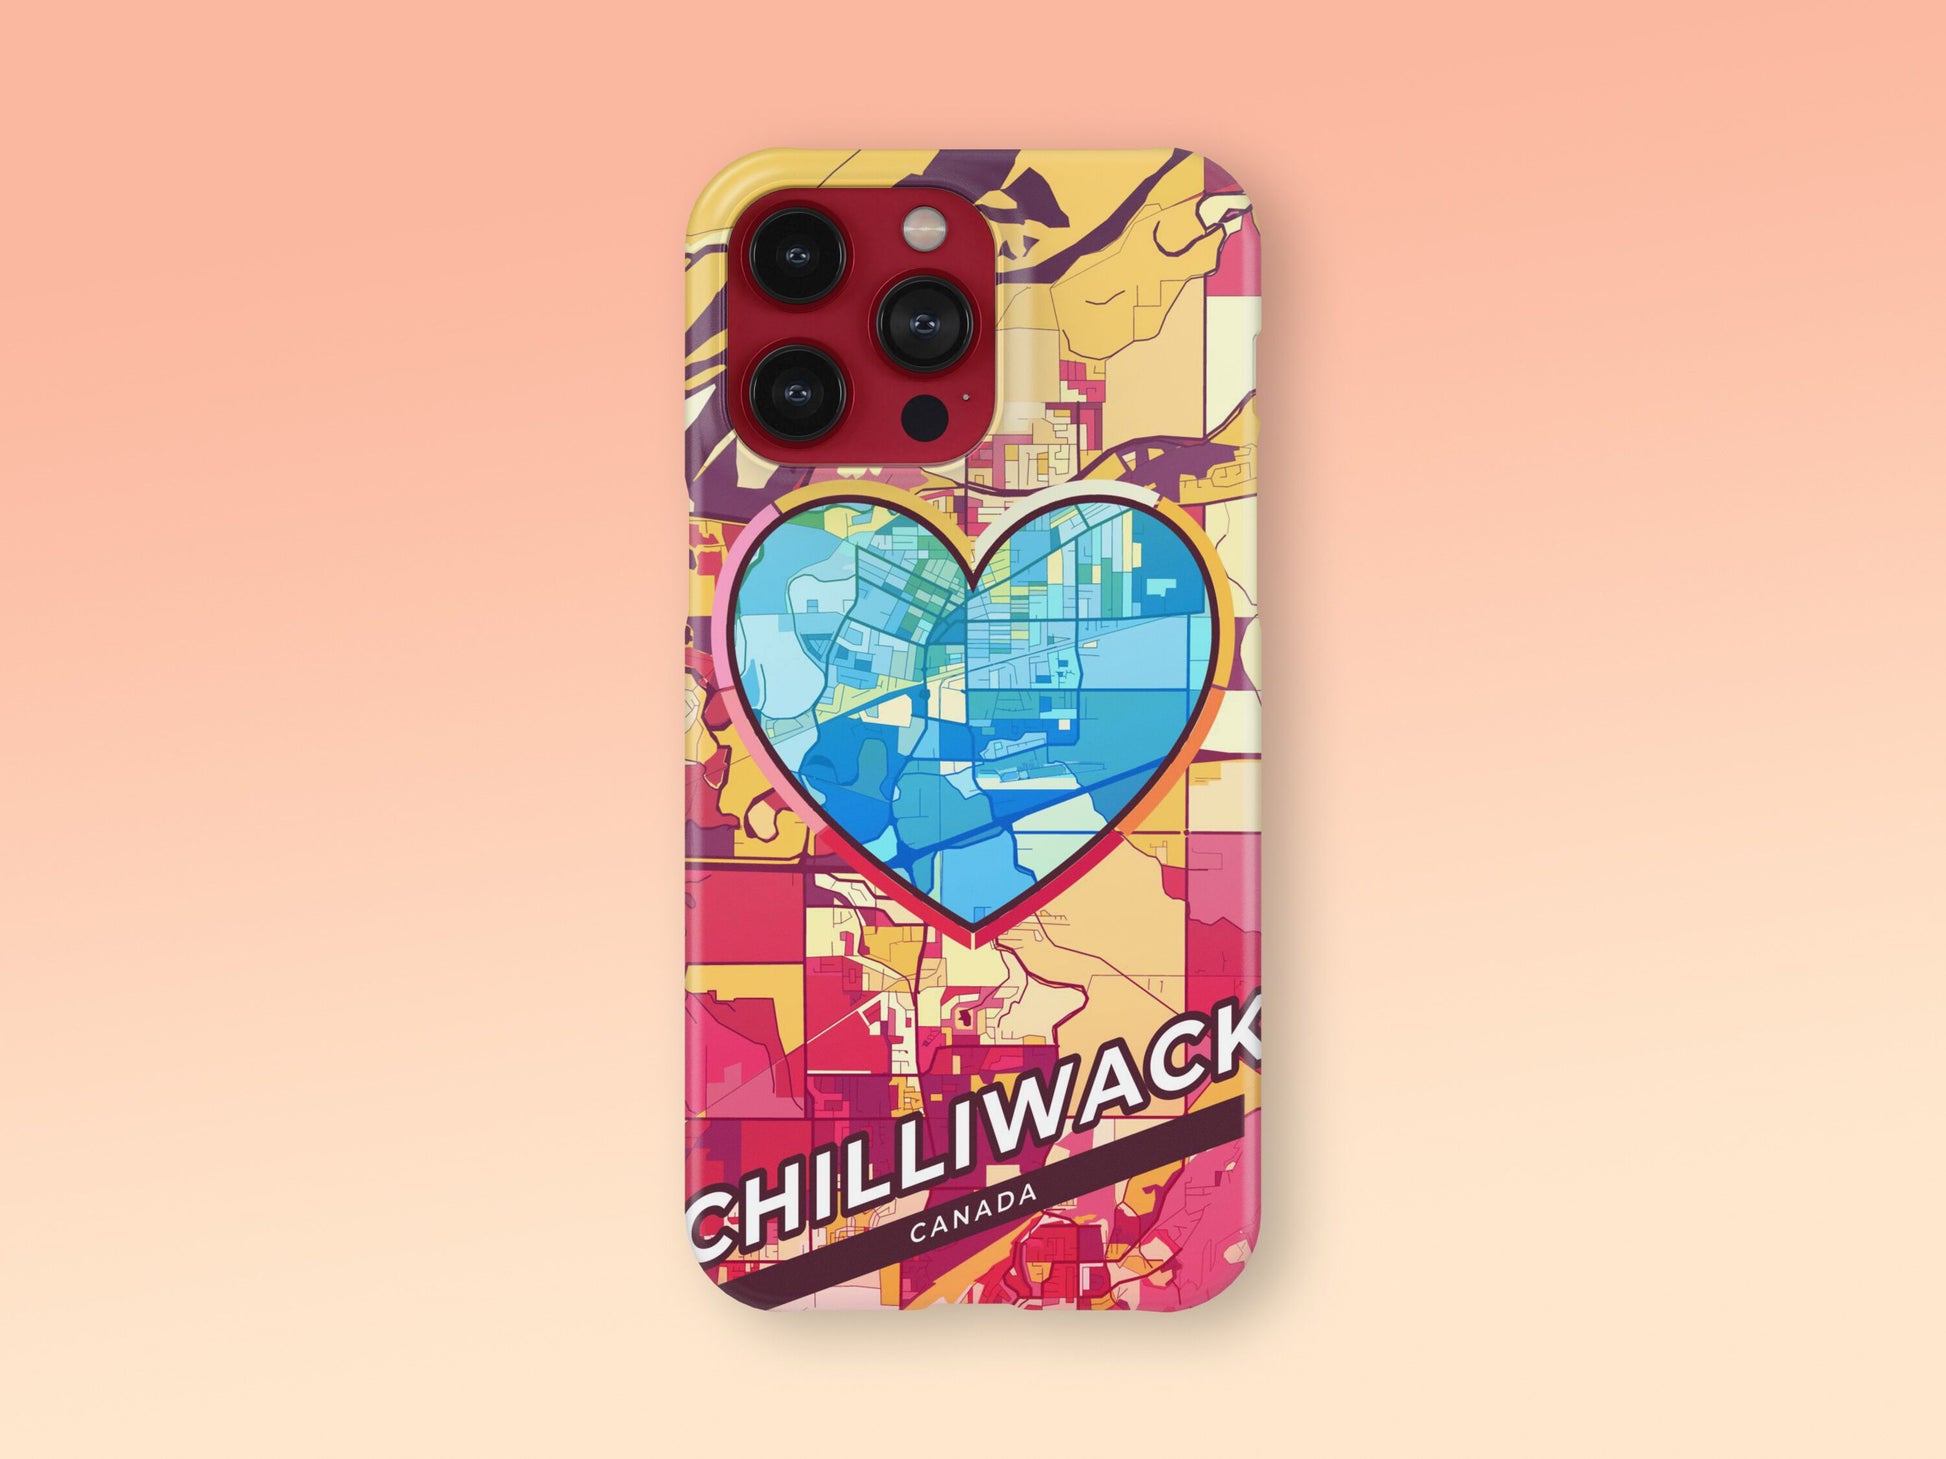 Chilliwack Canada slim phone case with colorful icon. Birthday, wedding or housewarming gift. Couple match cases. 2